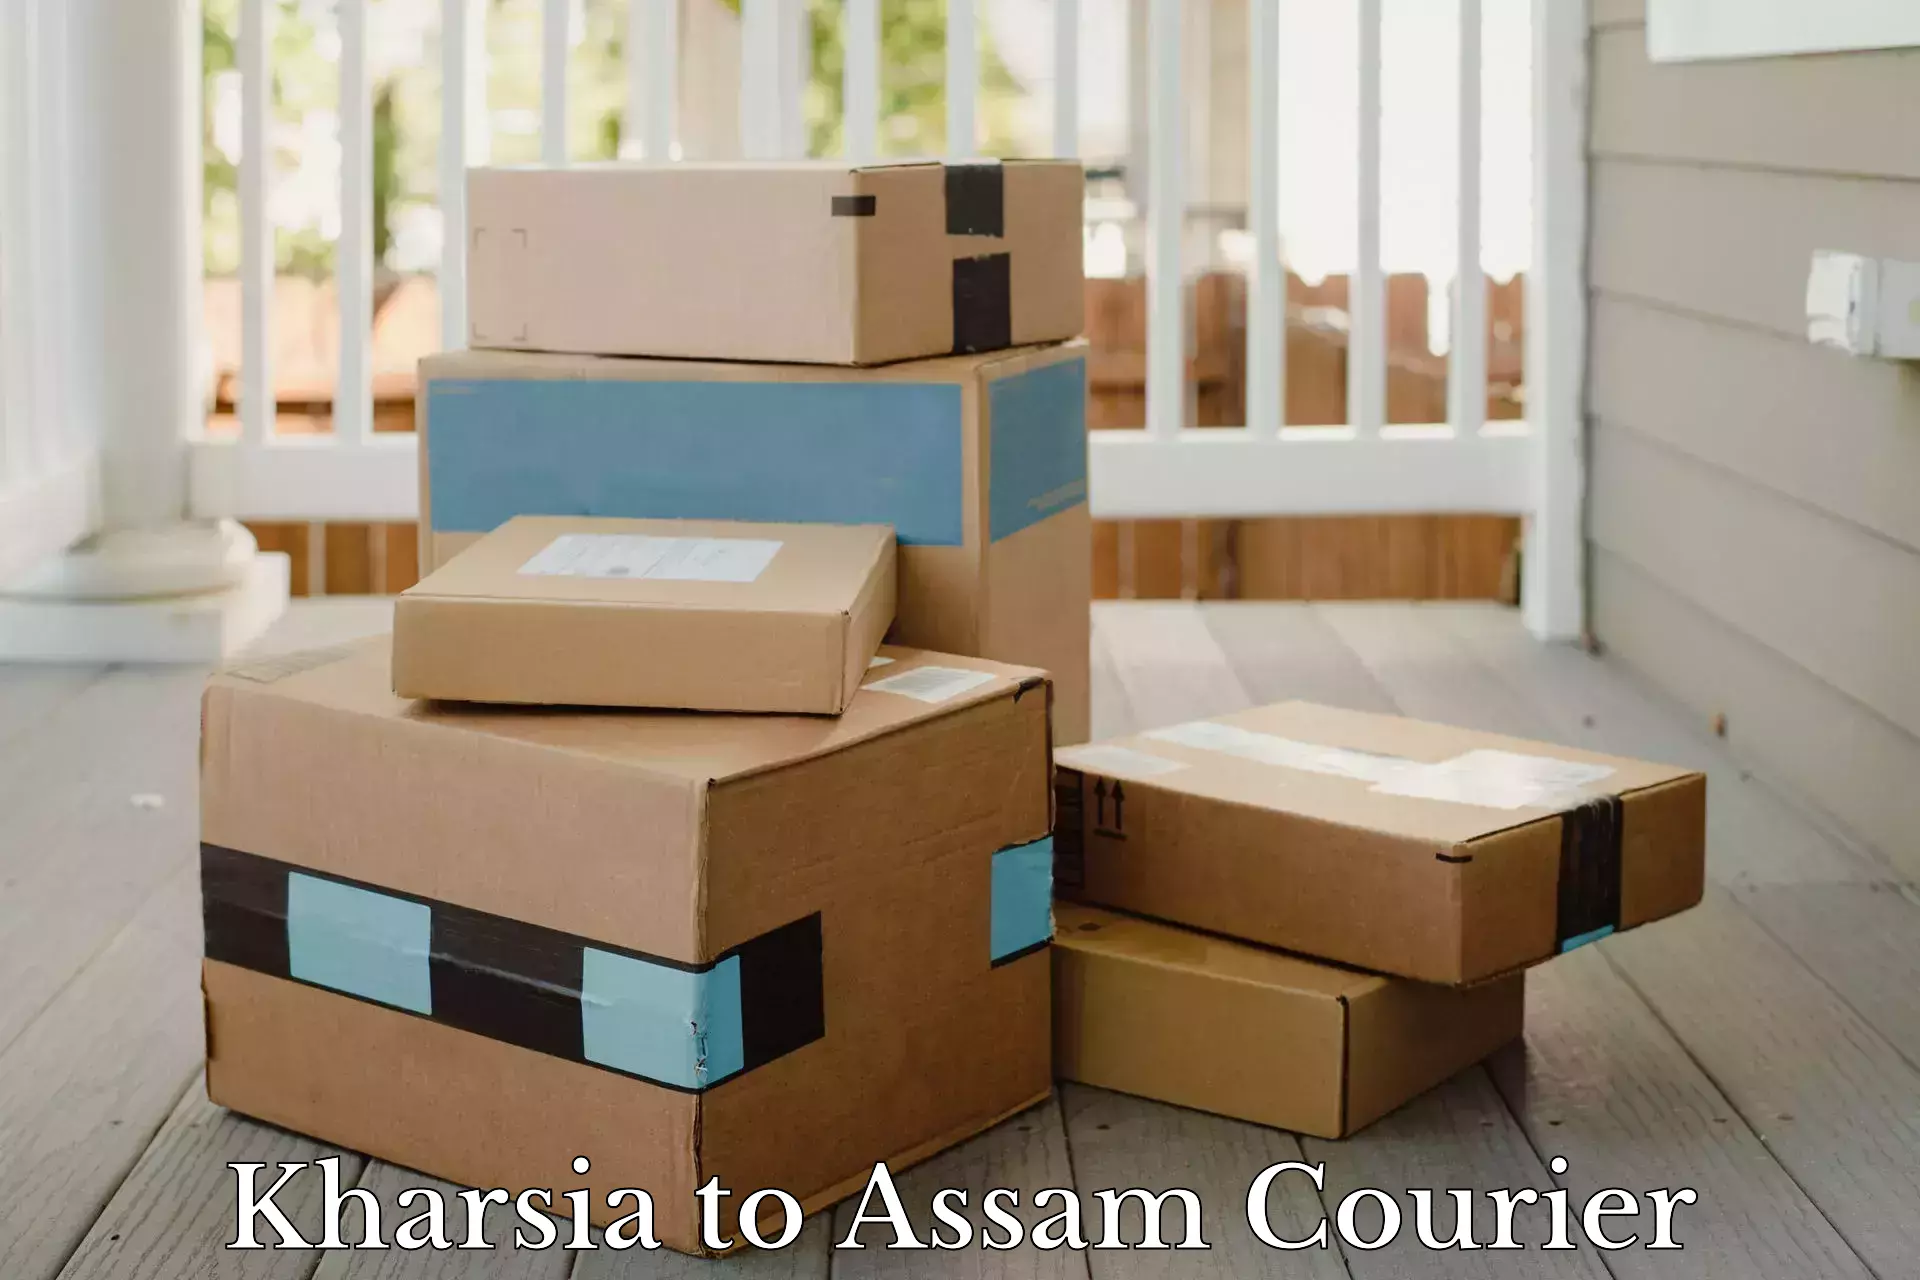 Rapid shipping services Kharsia to Lala Assam